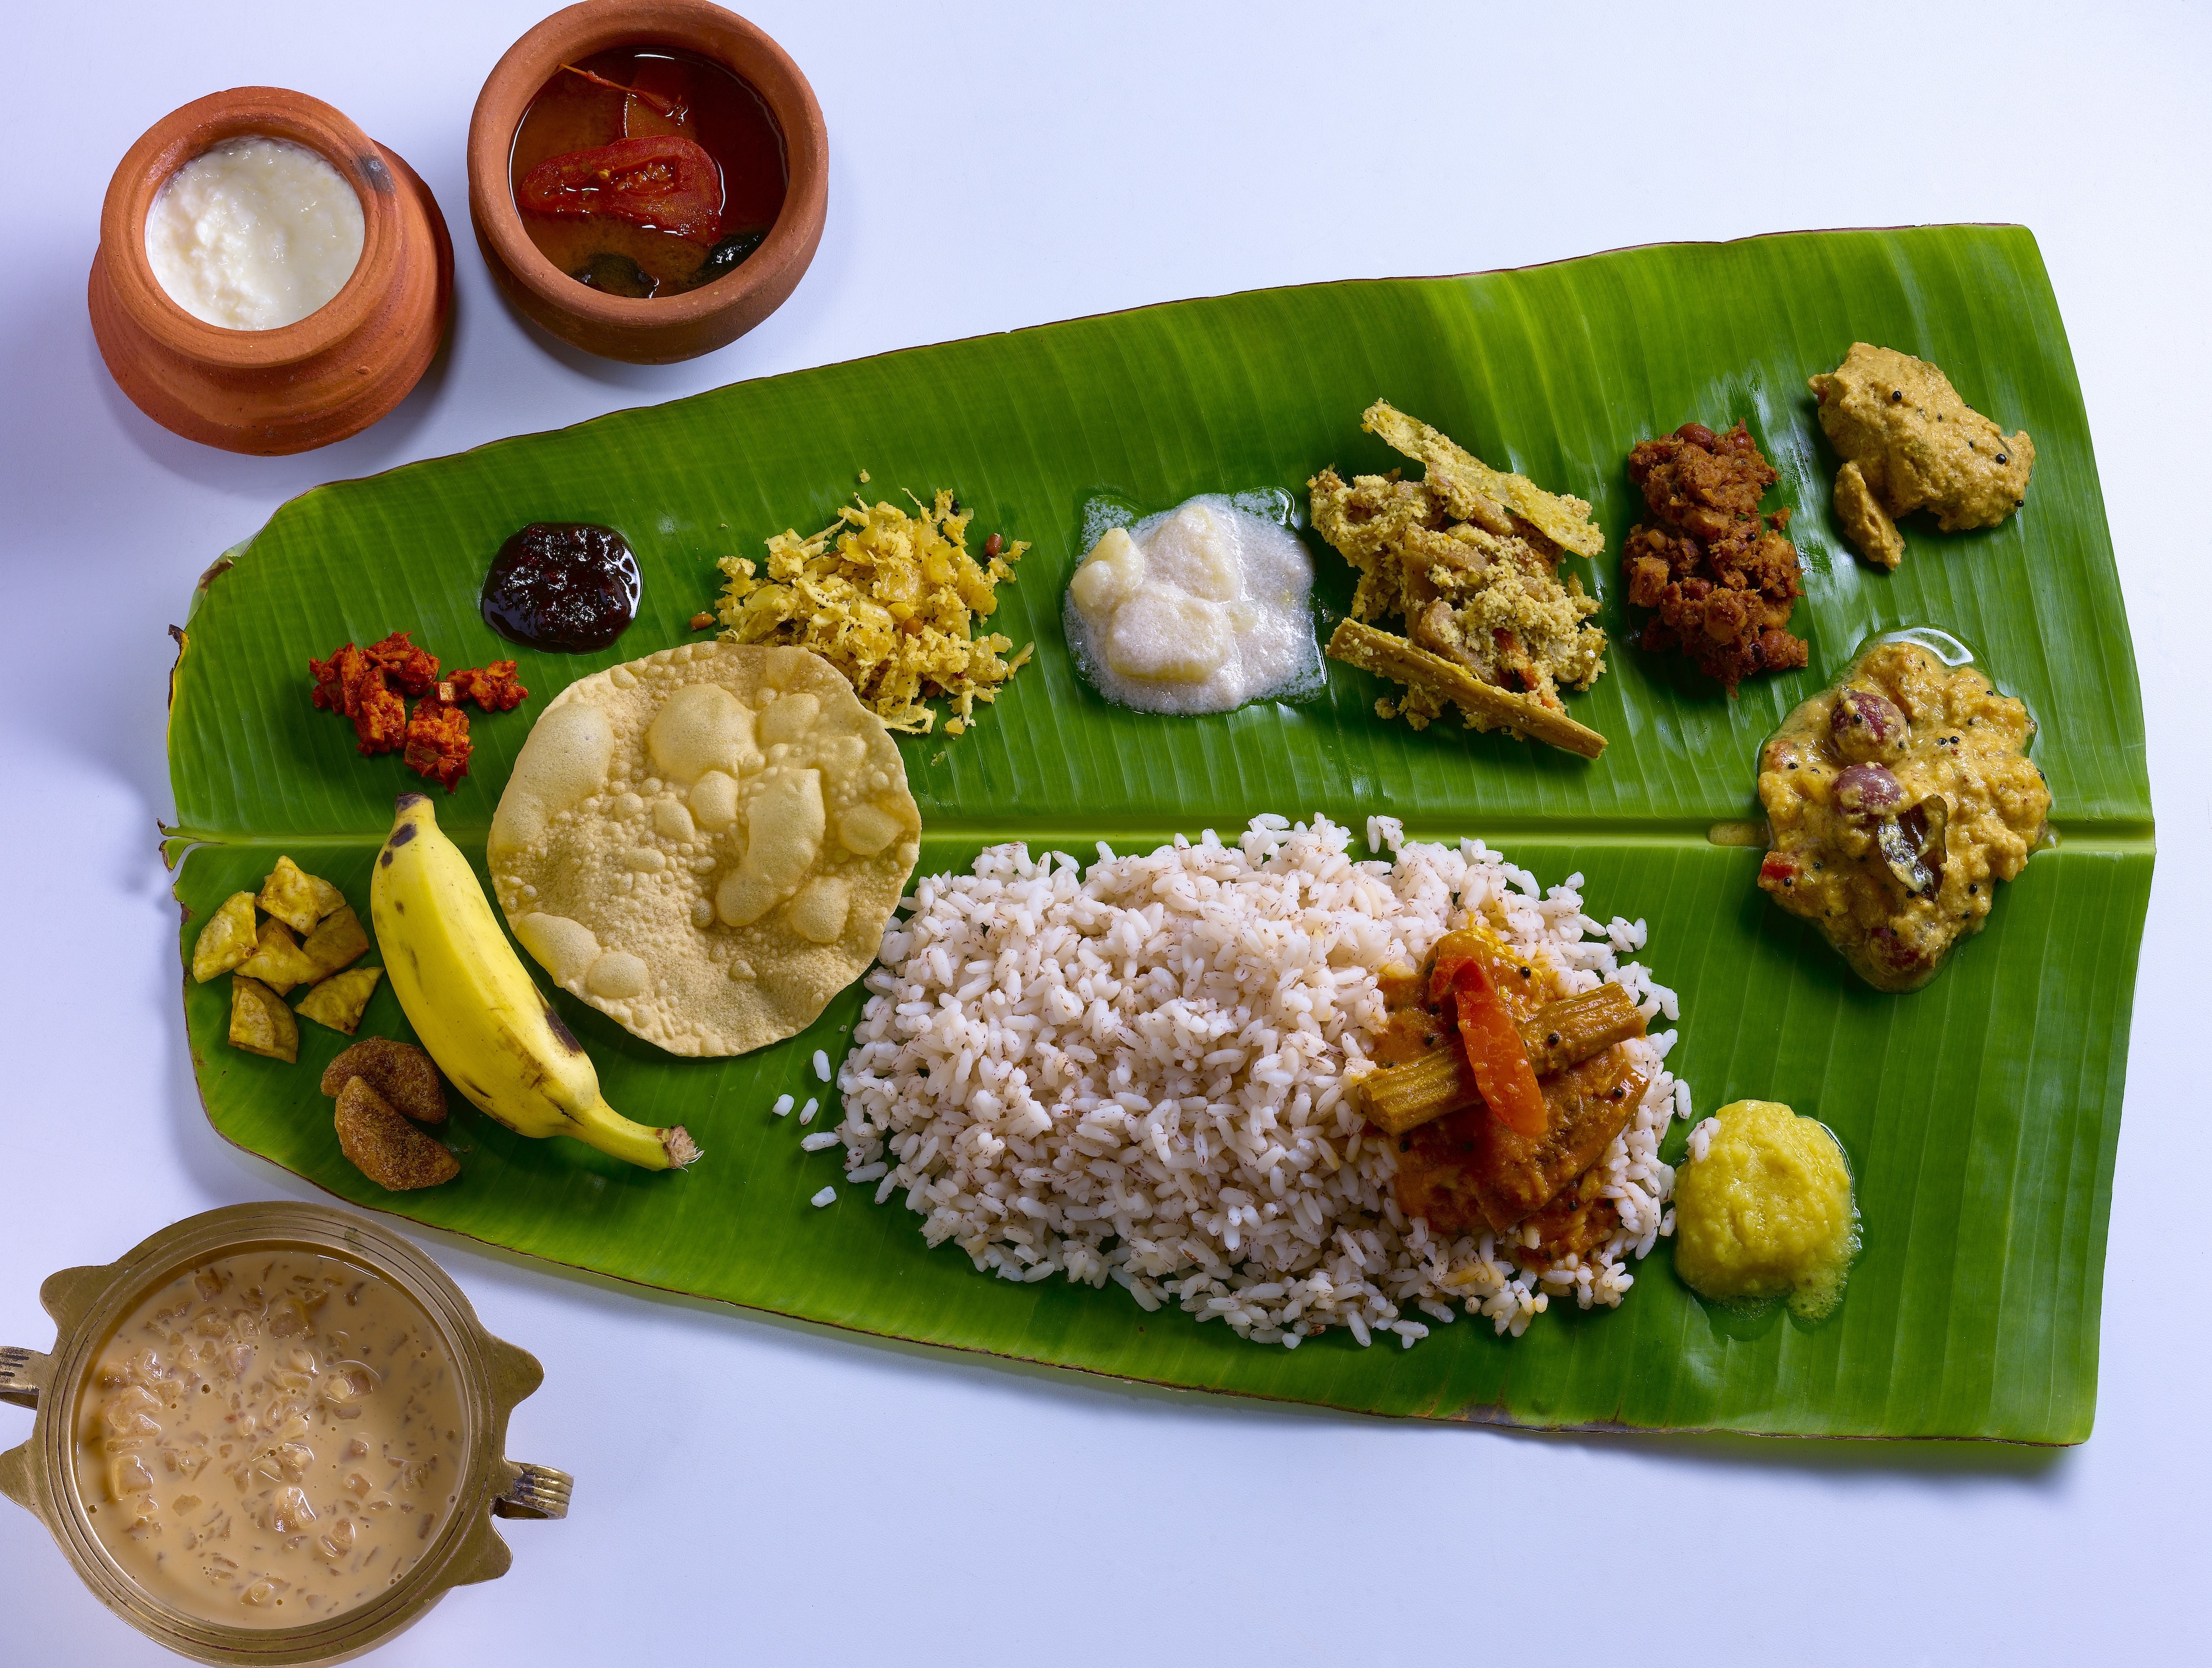 Think You Know All About Kerala Cuisine? Take this quiz